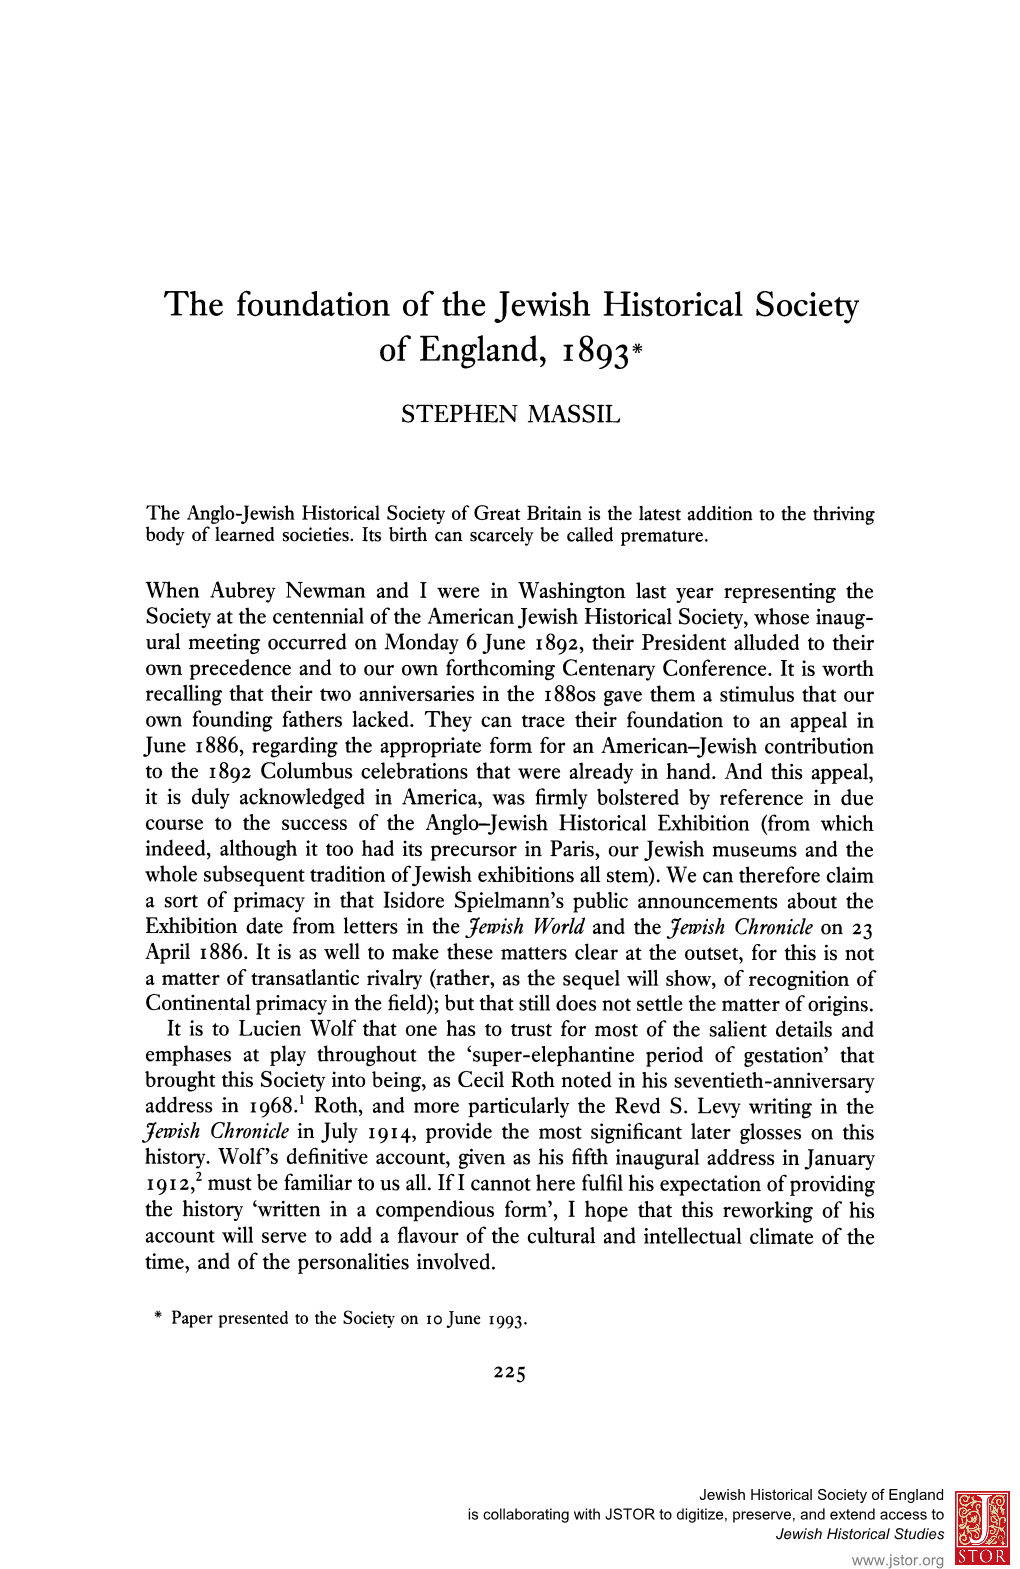 The Foundation of the Jewish Historical Society of England, 1893